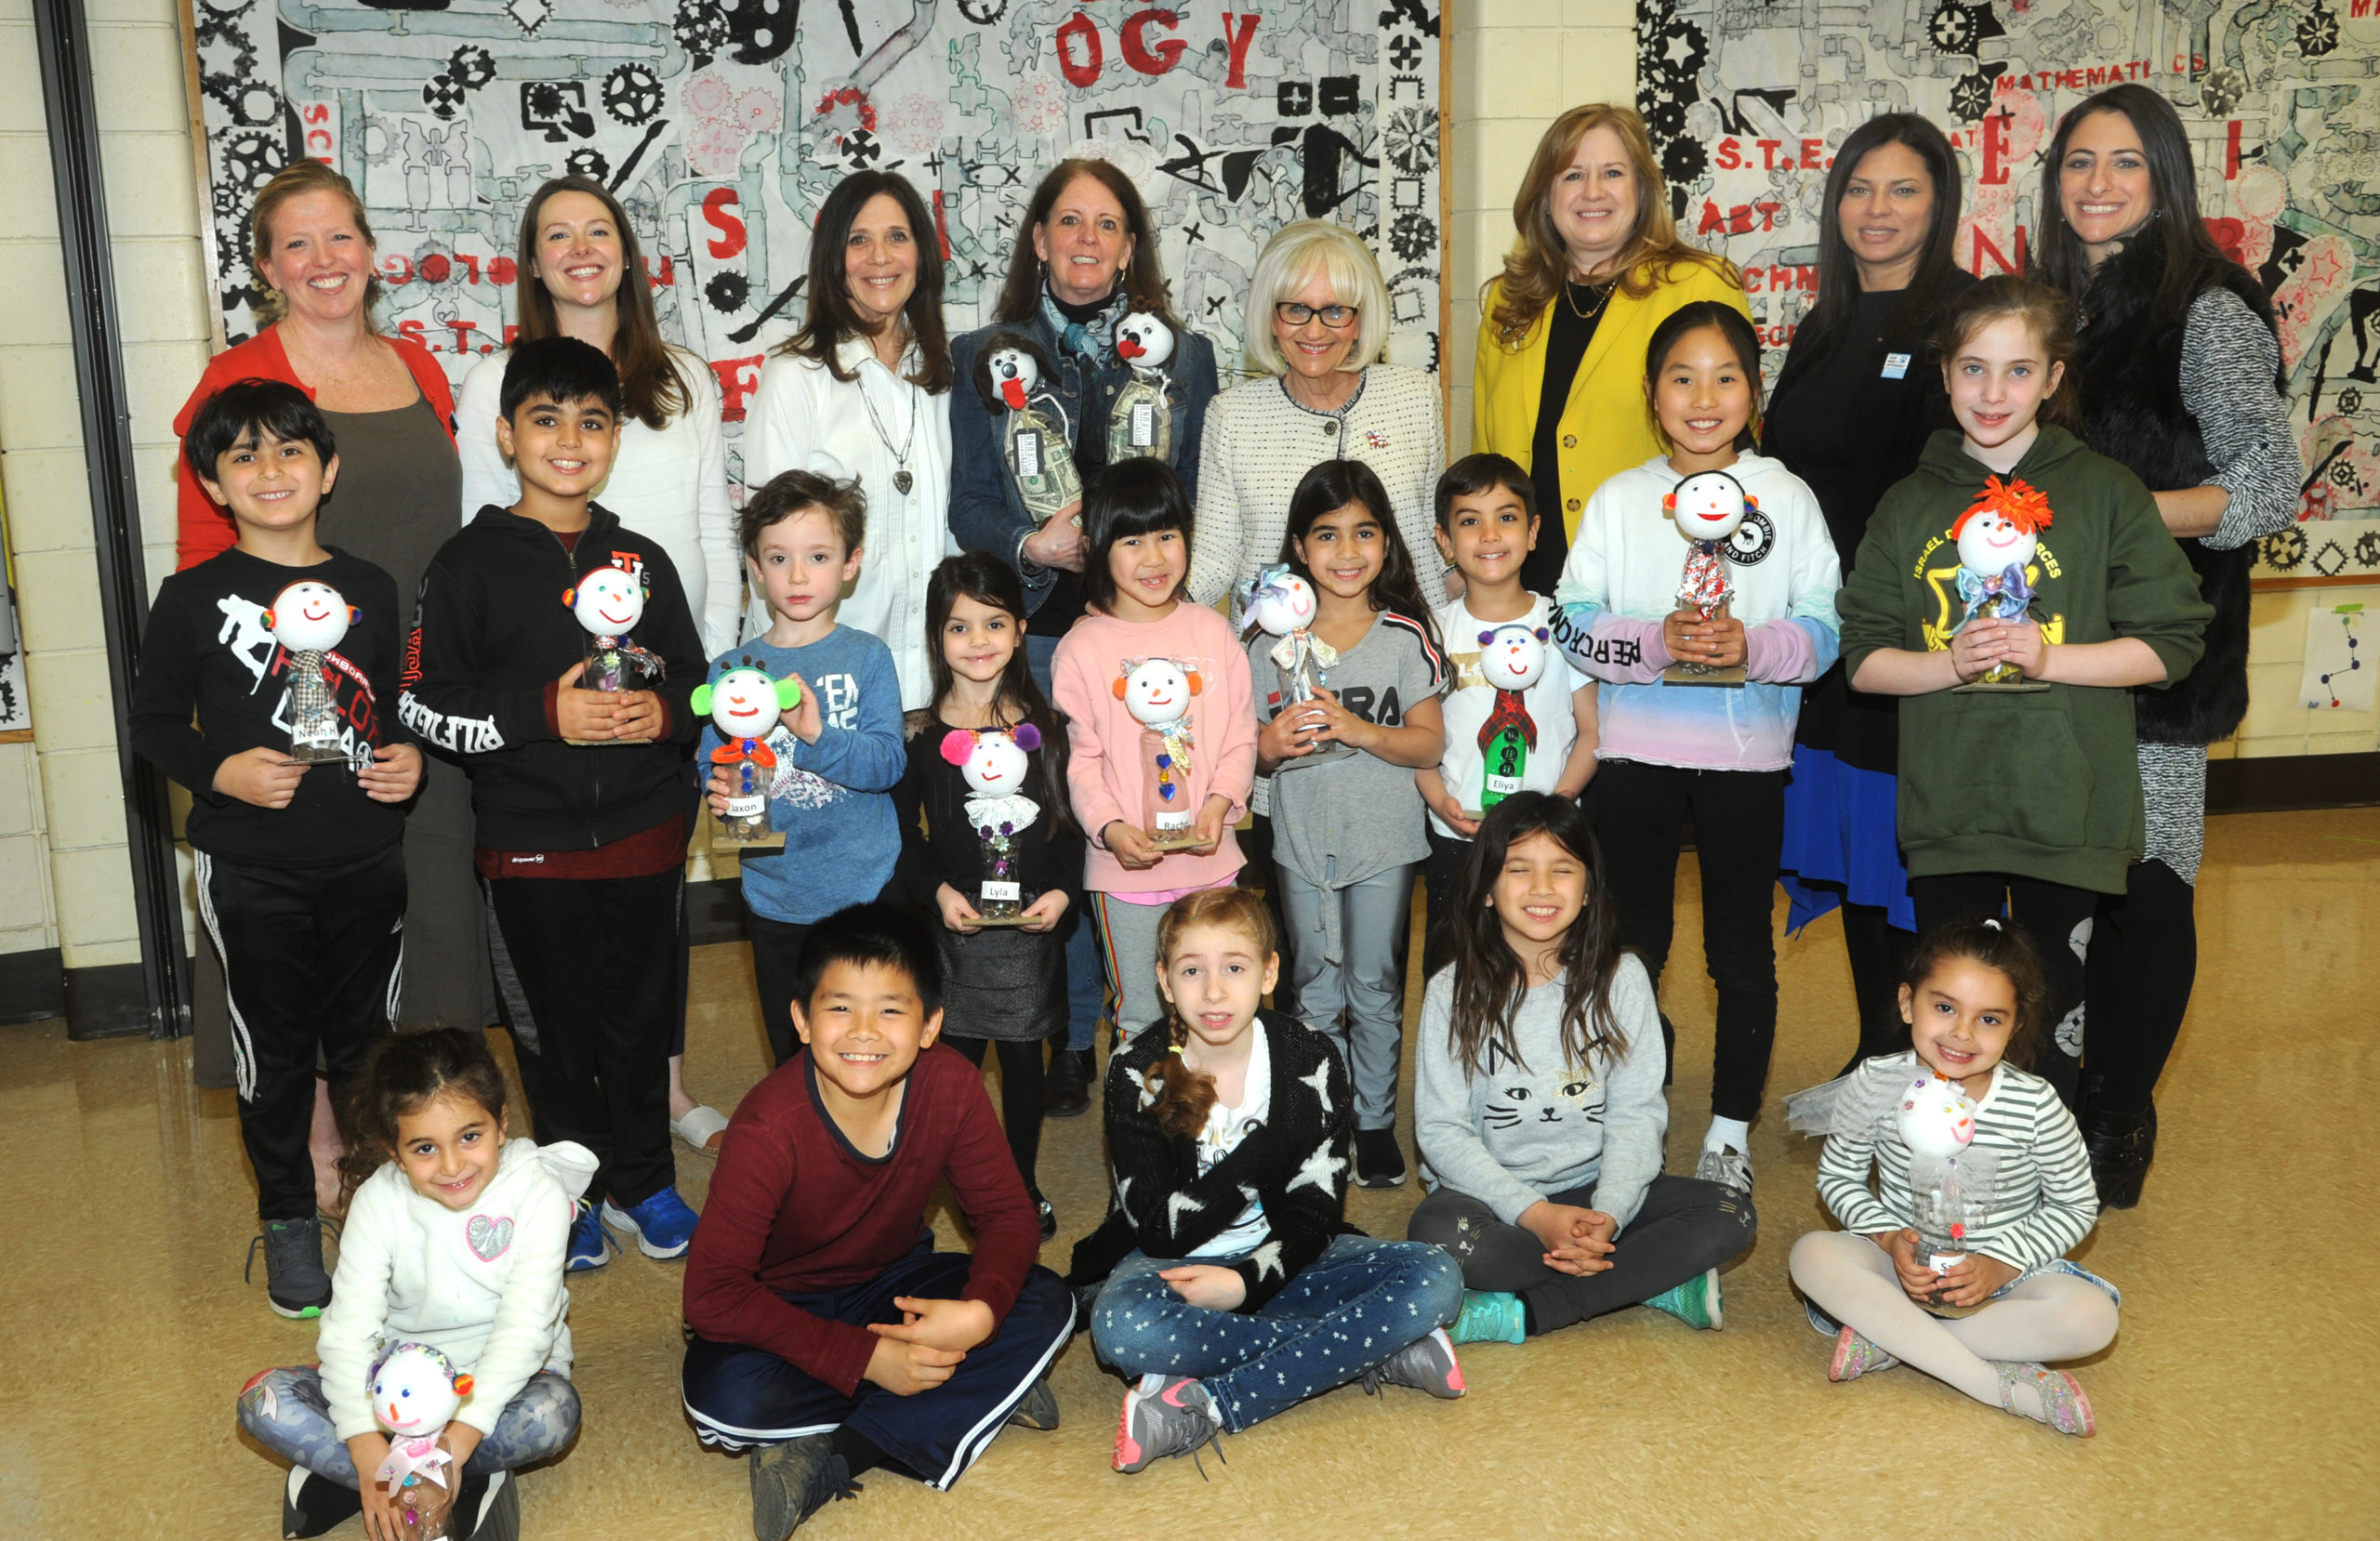 Saddle Rock kindergartners and fourth graders are joined by science teacher Janene Rowland, fourth-grade teacher Lauren Rio, kindergarten teacher Sabra Satten, Jane Barbato of The Dotty Fund, North Hempstead Town Supervisor Judi Bosworth, Great Neck Superintendent of Schools Teresa Prendergast, Saddle Rock Principal Luci Bradley and Assistant Principal Sara Goldberg. (Photo by Bill Cancellare)